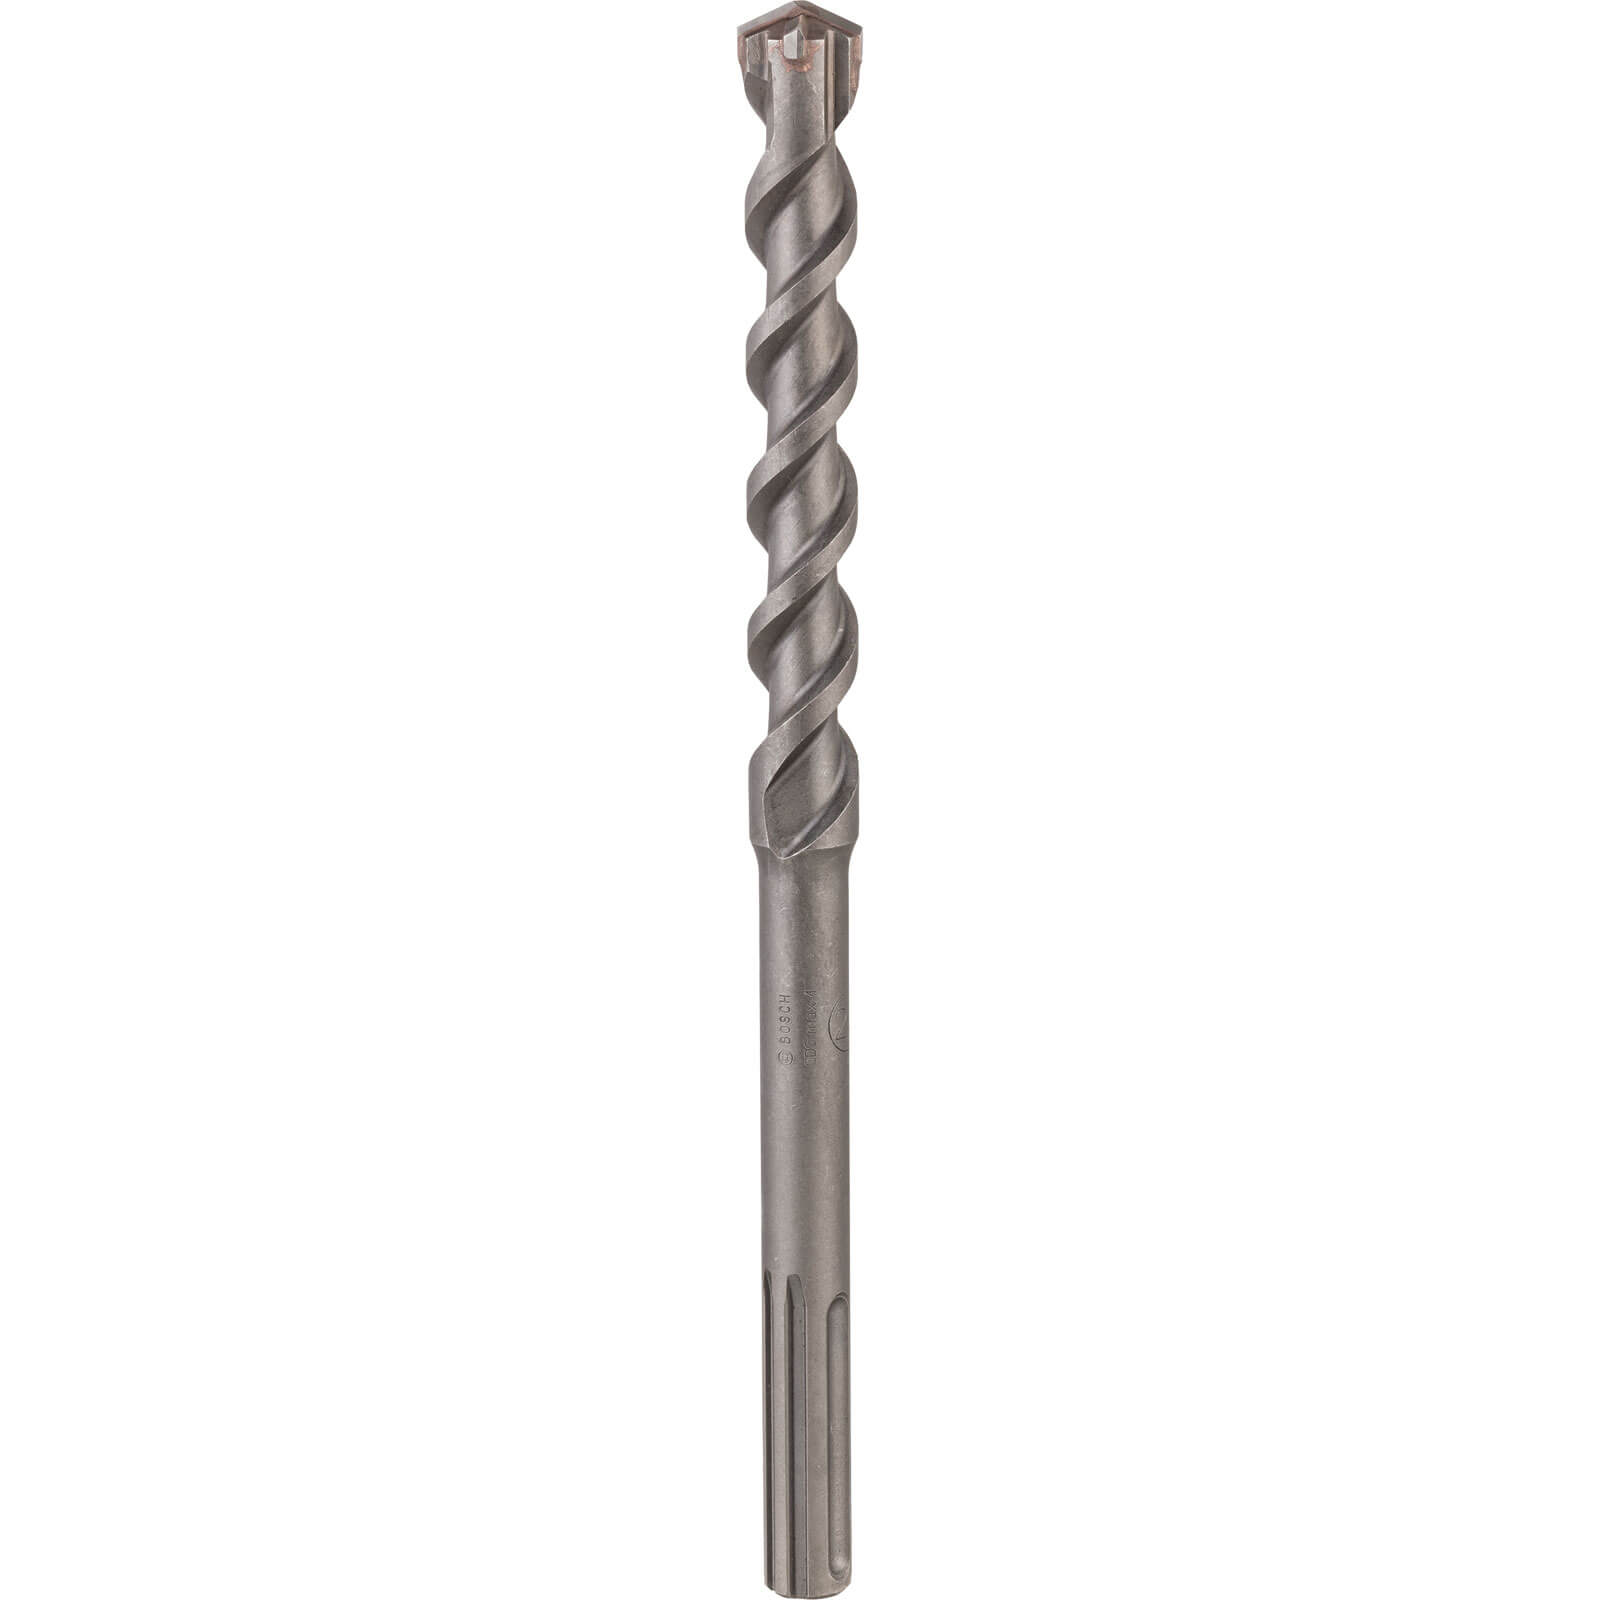 Image of Bosch M4 SDS Max Masonry Drill Bit 24mm 320mm Pack of 1